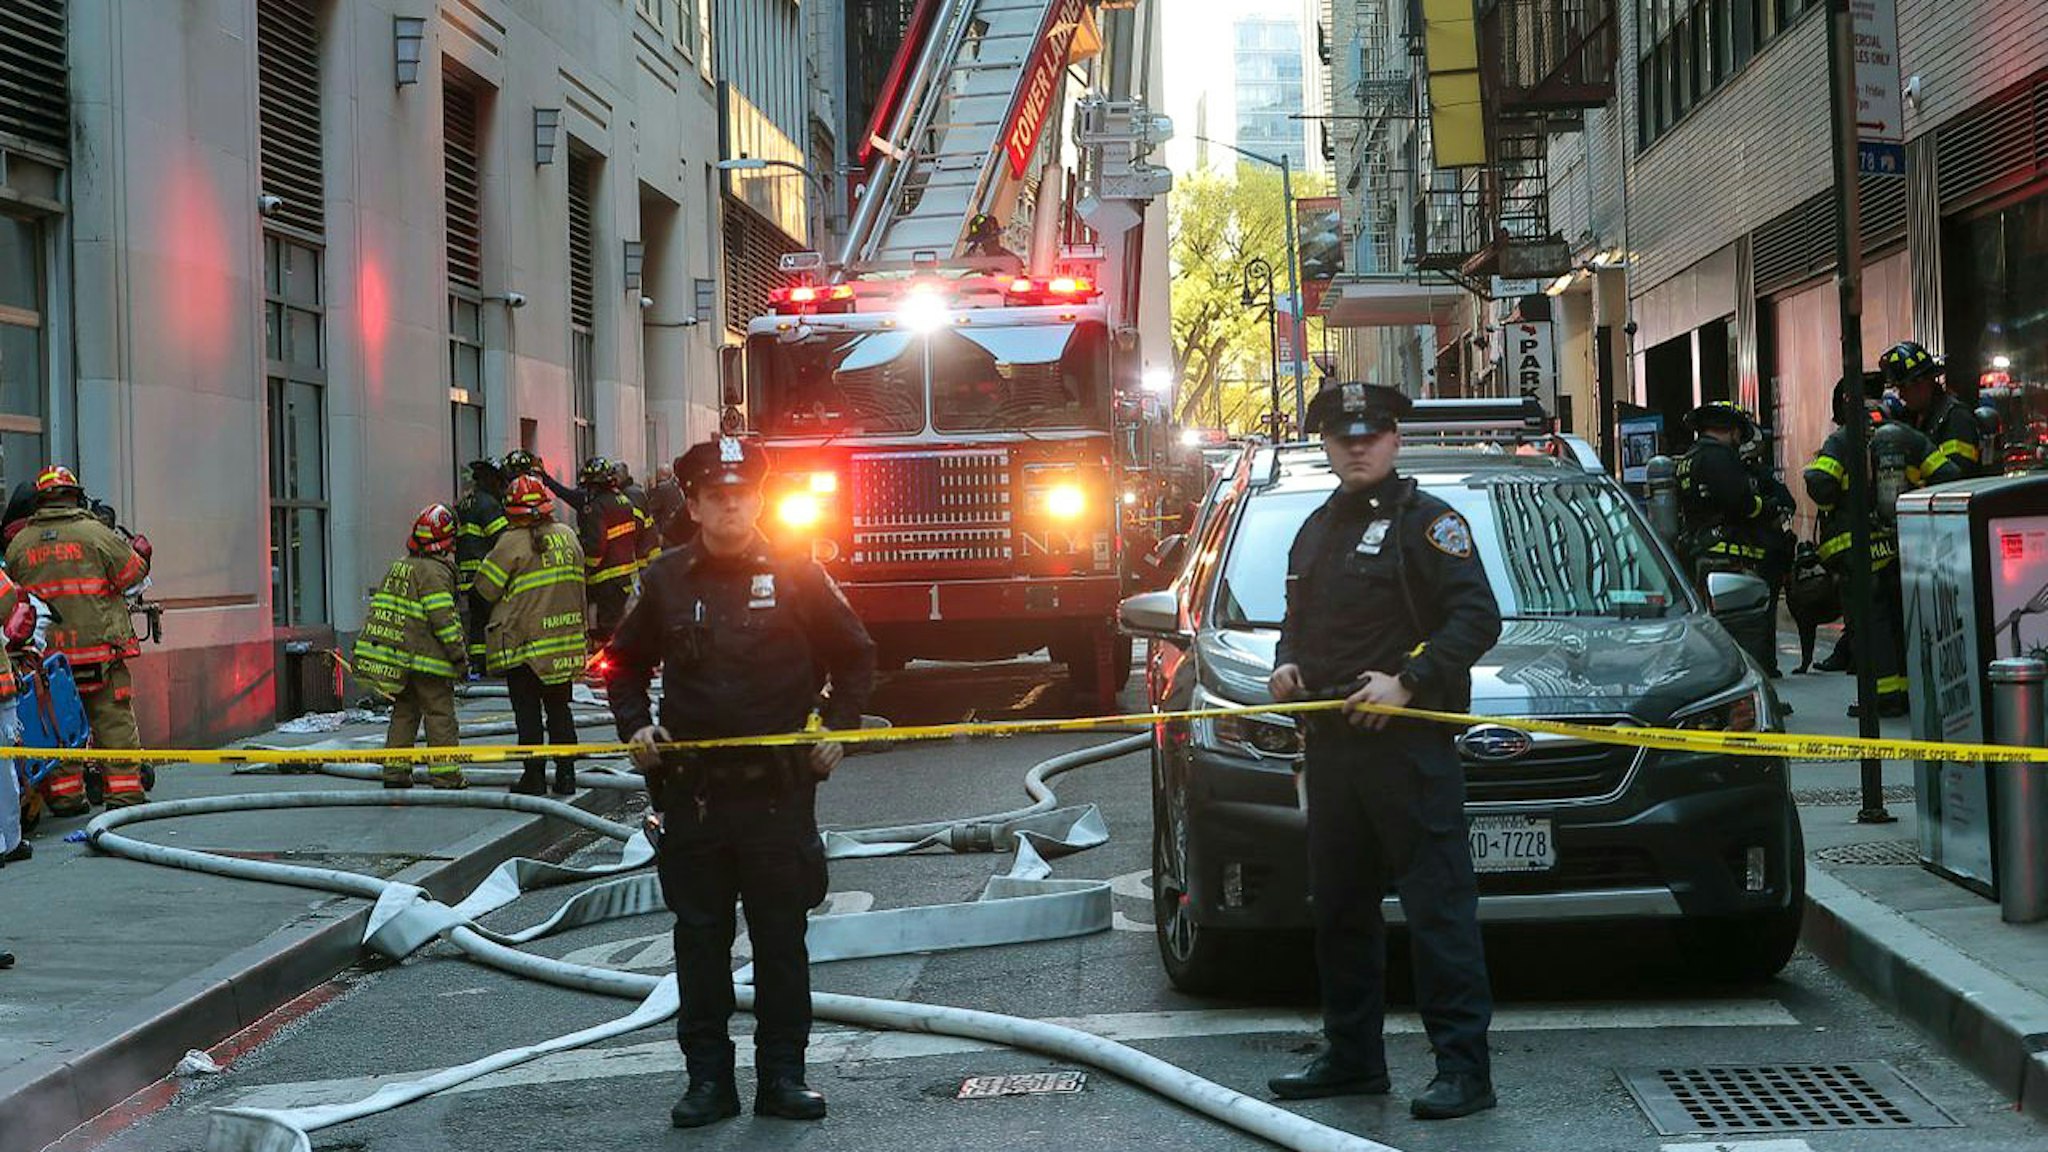 NEW YORK, UNITED STATES - APRIL 18: Police take security measures around the partially collapsed parking garage in Manhattan, New York, United States on April 18, 2023. A parking garage partially collapsed in New York City on Tuesday, leaving at least one person dead and several others injured.